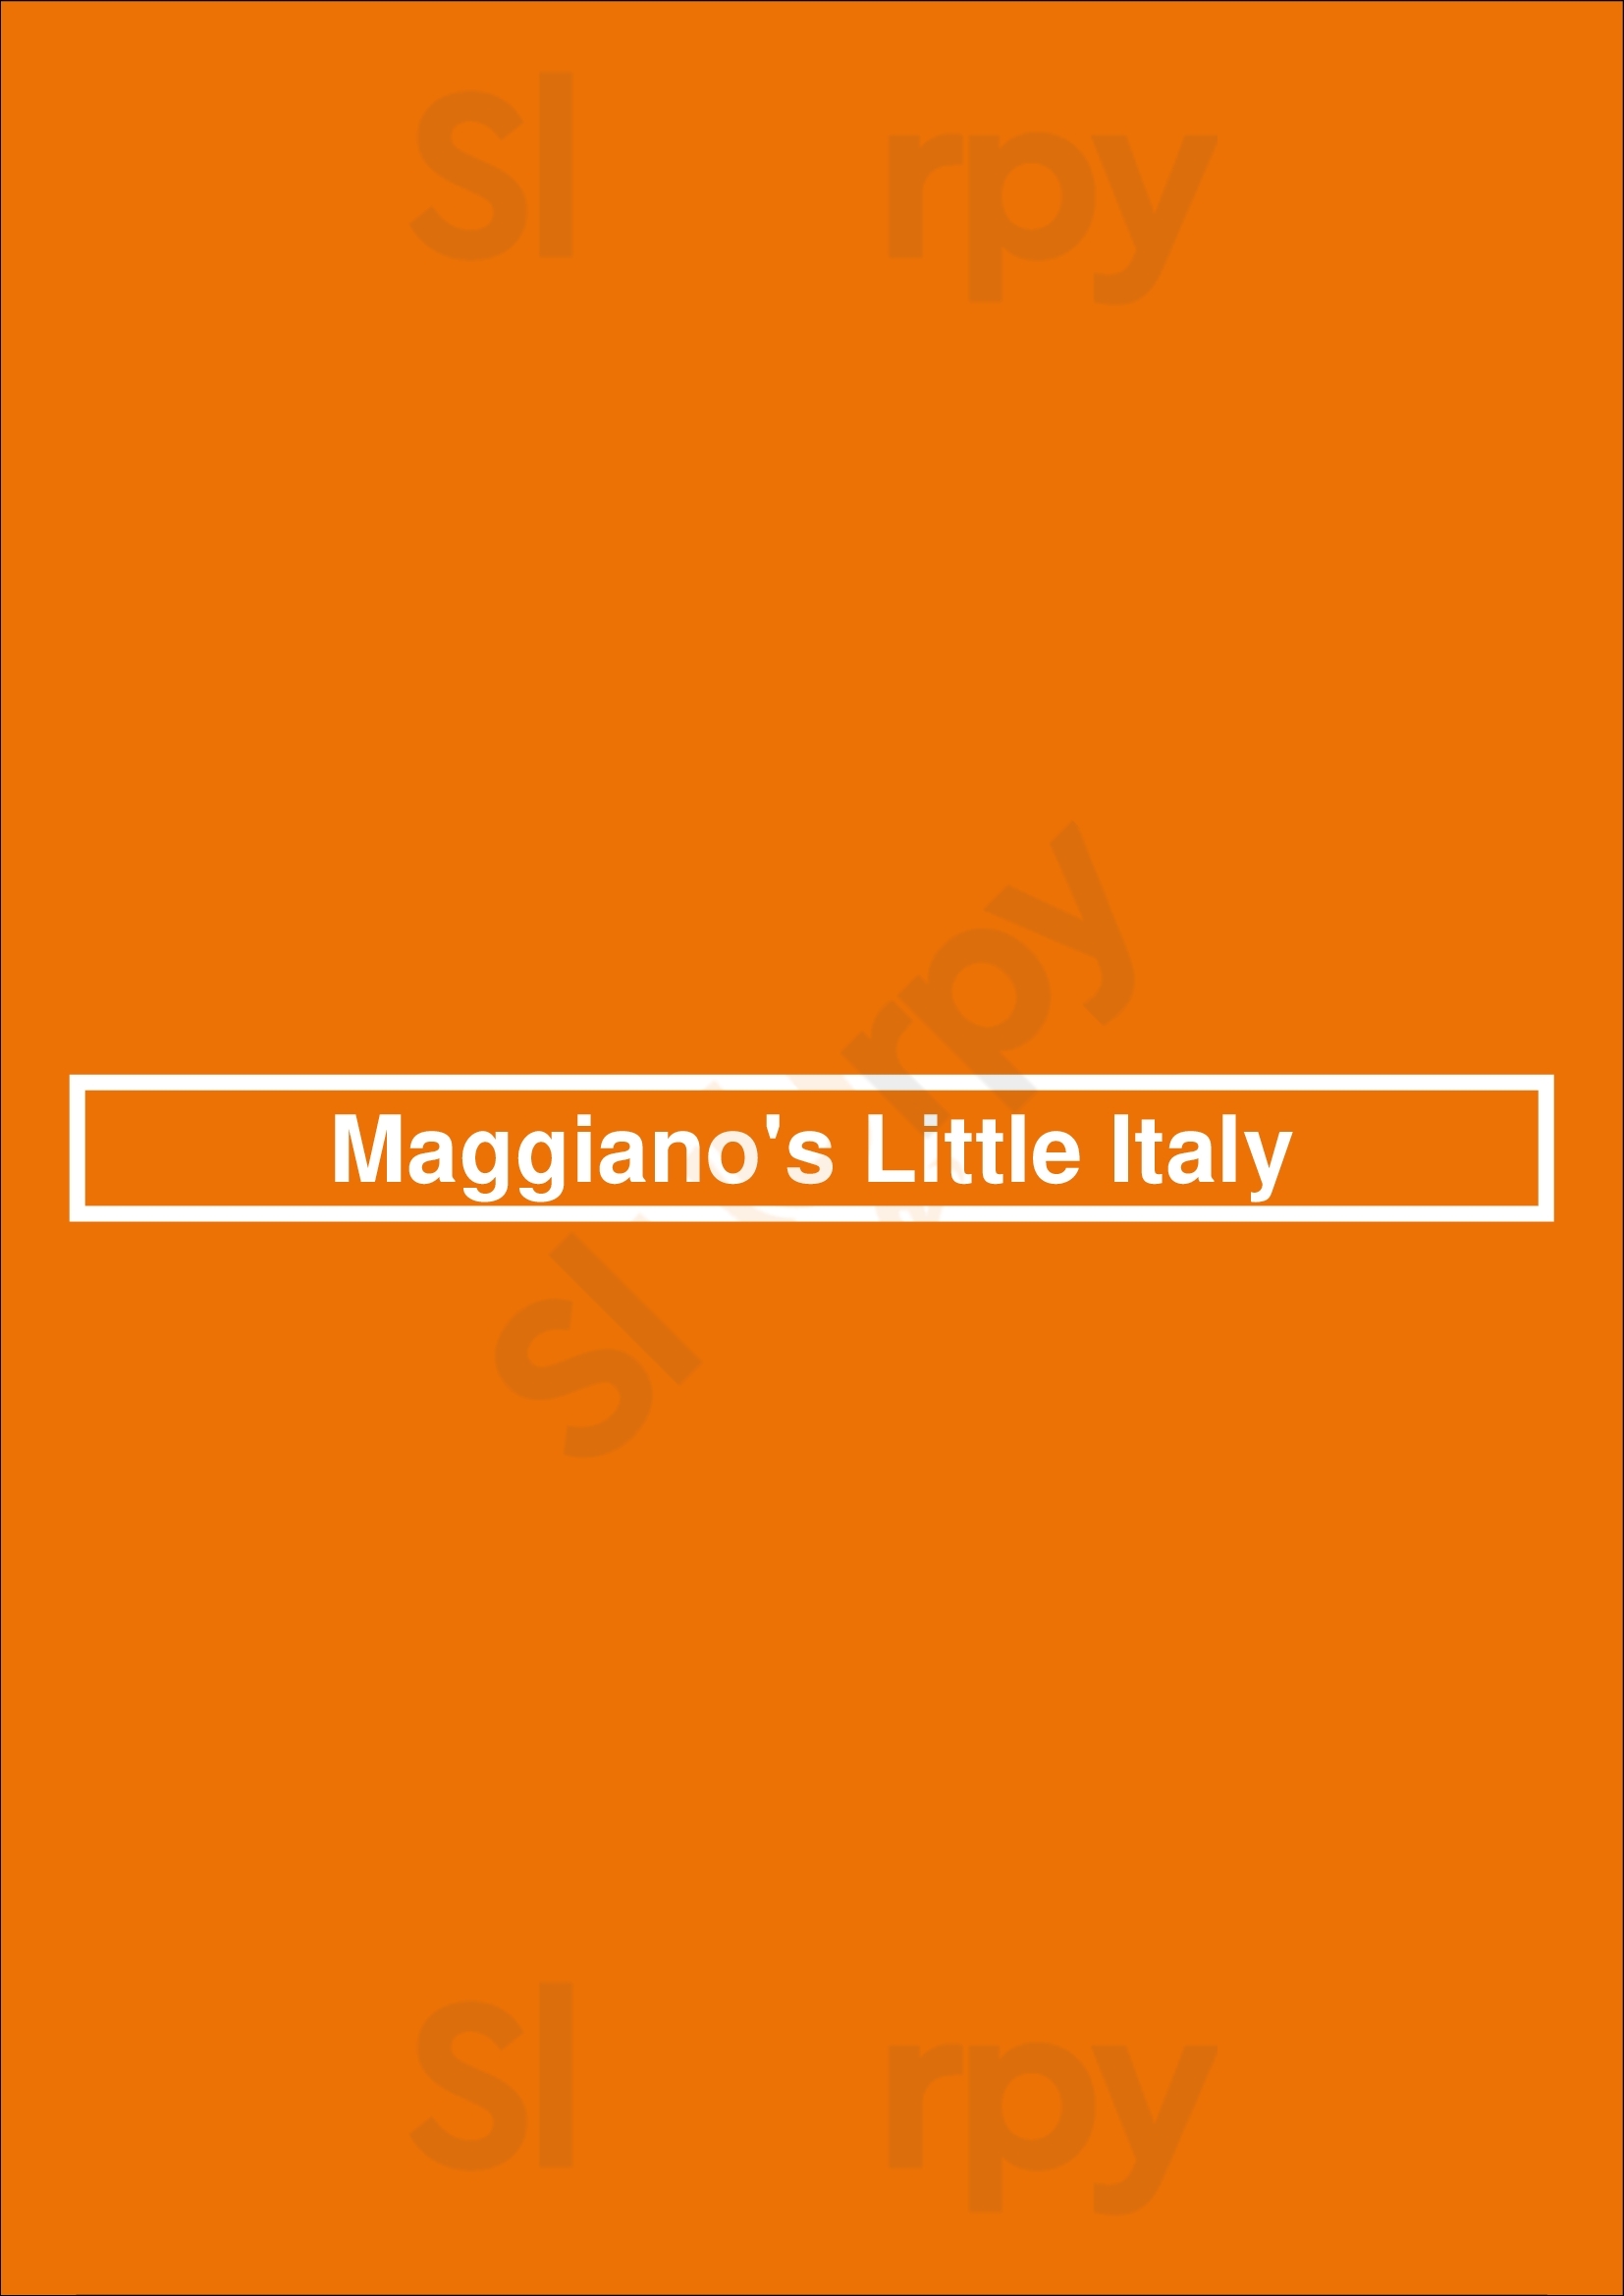 Maggiano's Little Italy Chicago Menu - 1